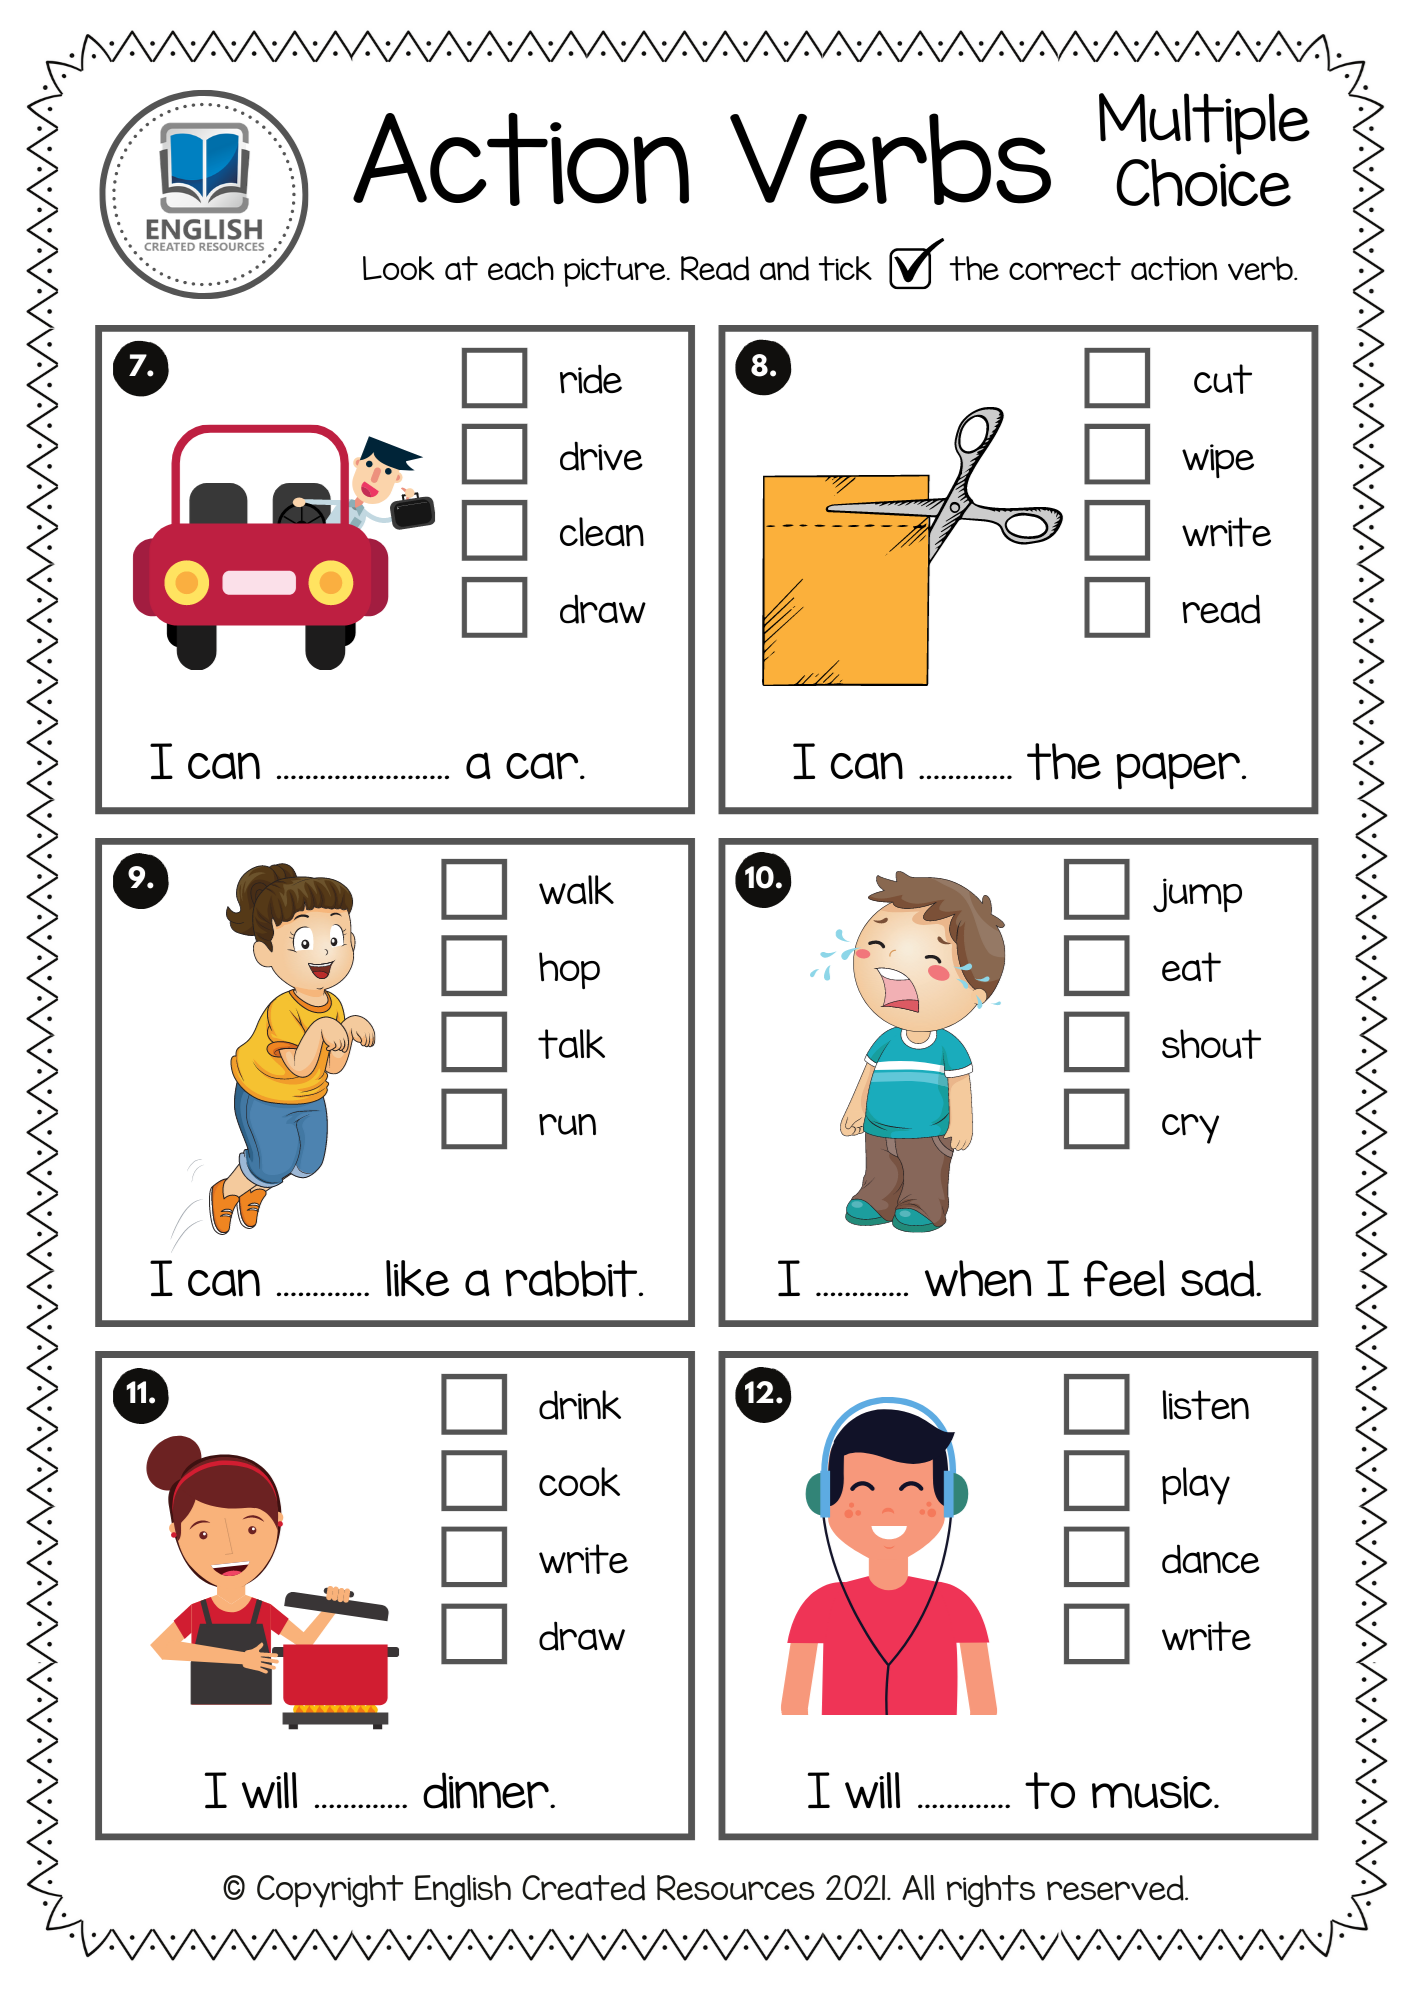 Action Verbs Activity Book English Created Resources